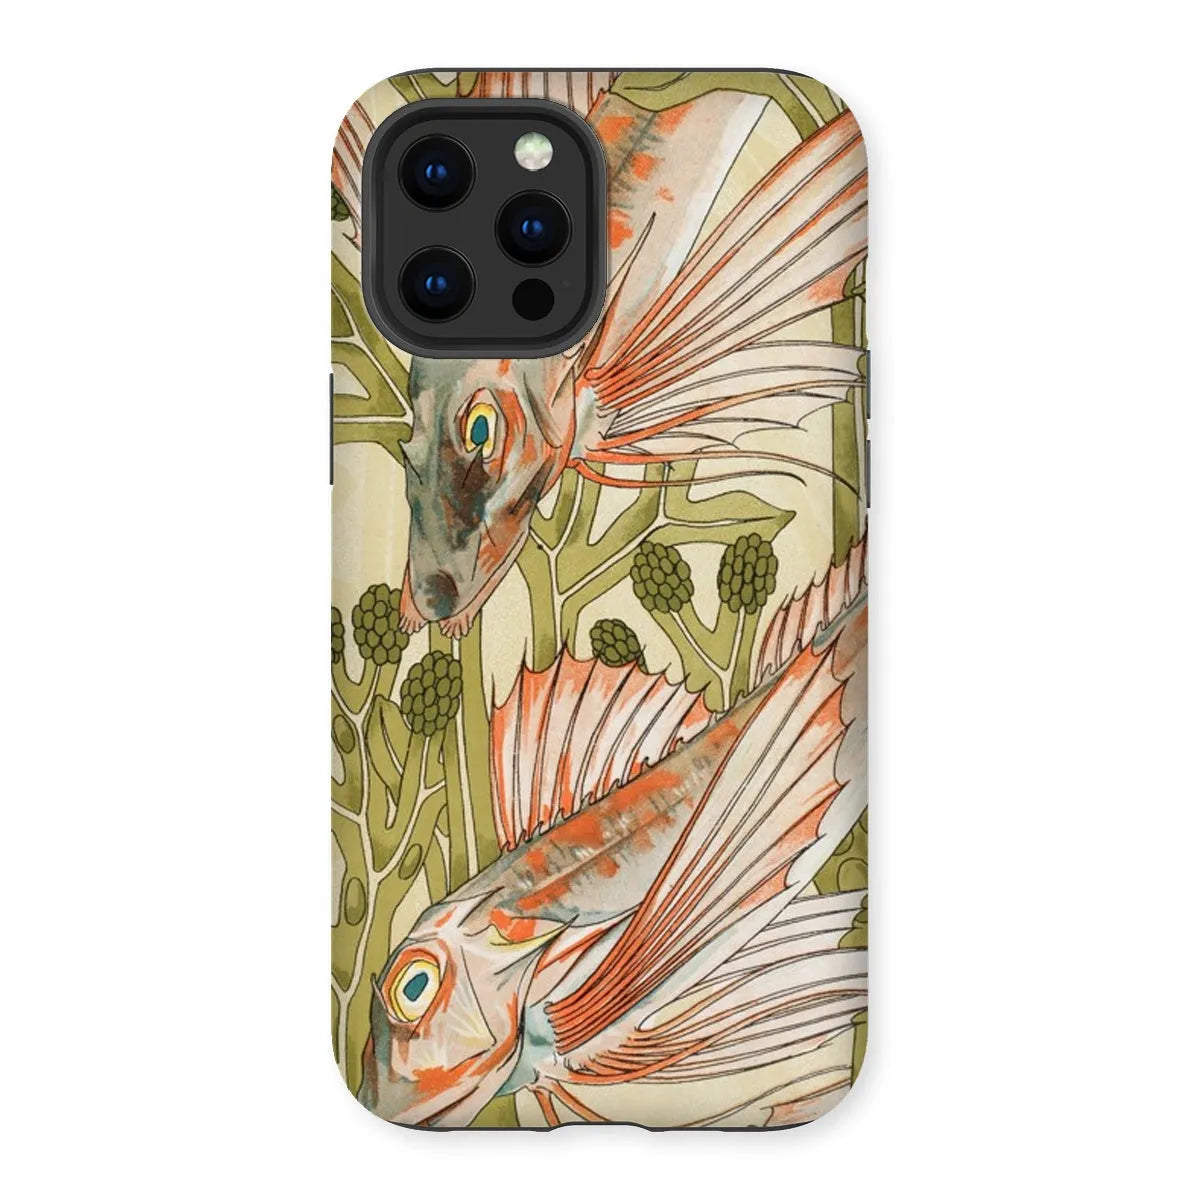 Red Fish - Animal Art Phone Case - Maurice Pillard Verneuil - Iphone 12 Pro Max / Matte - Mobile Phone Cases